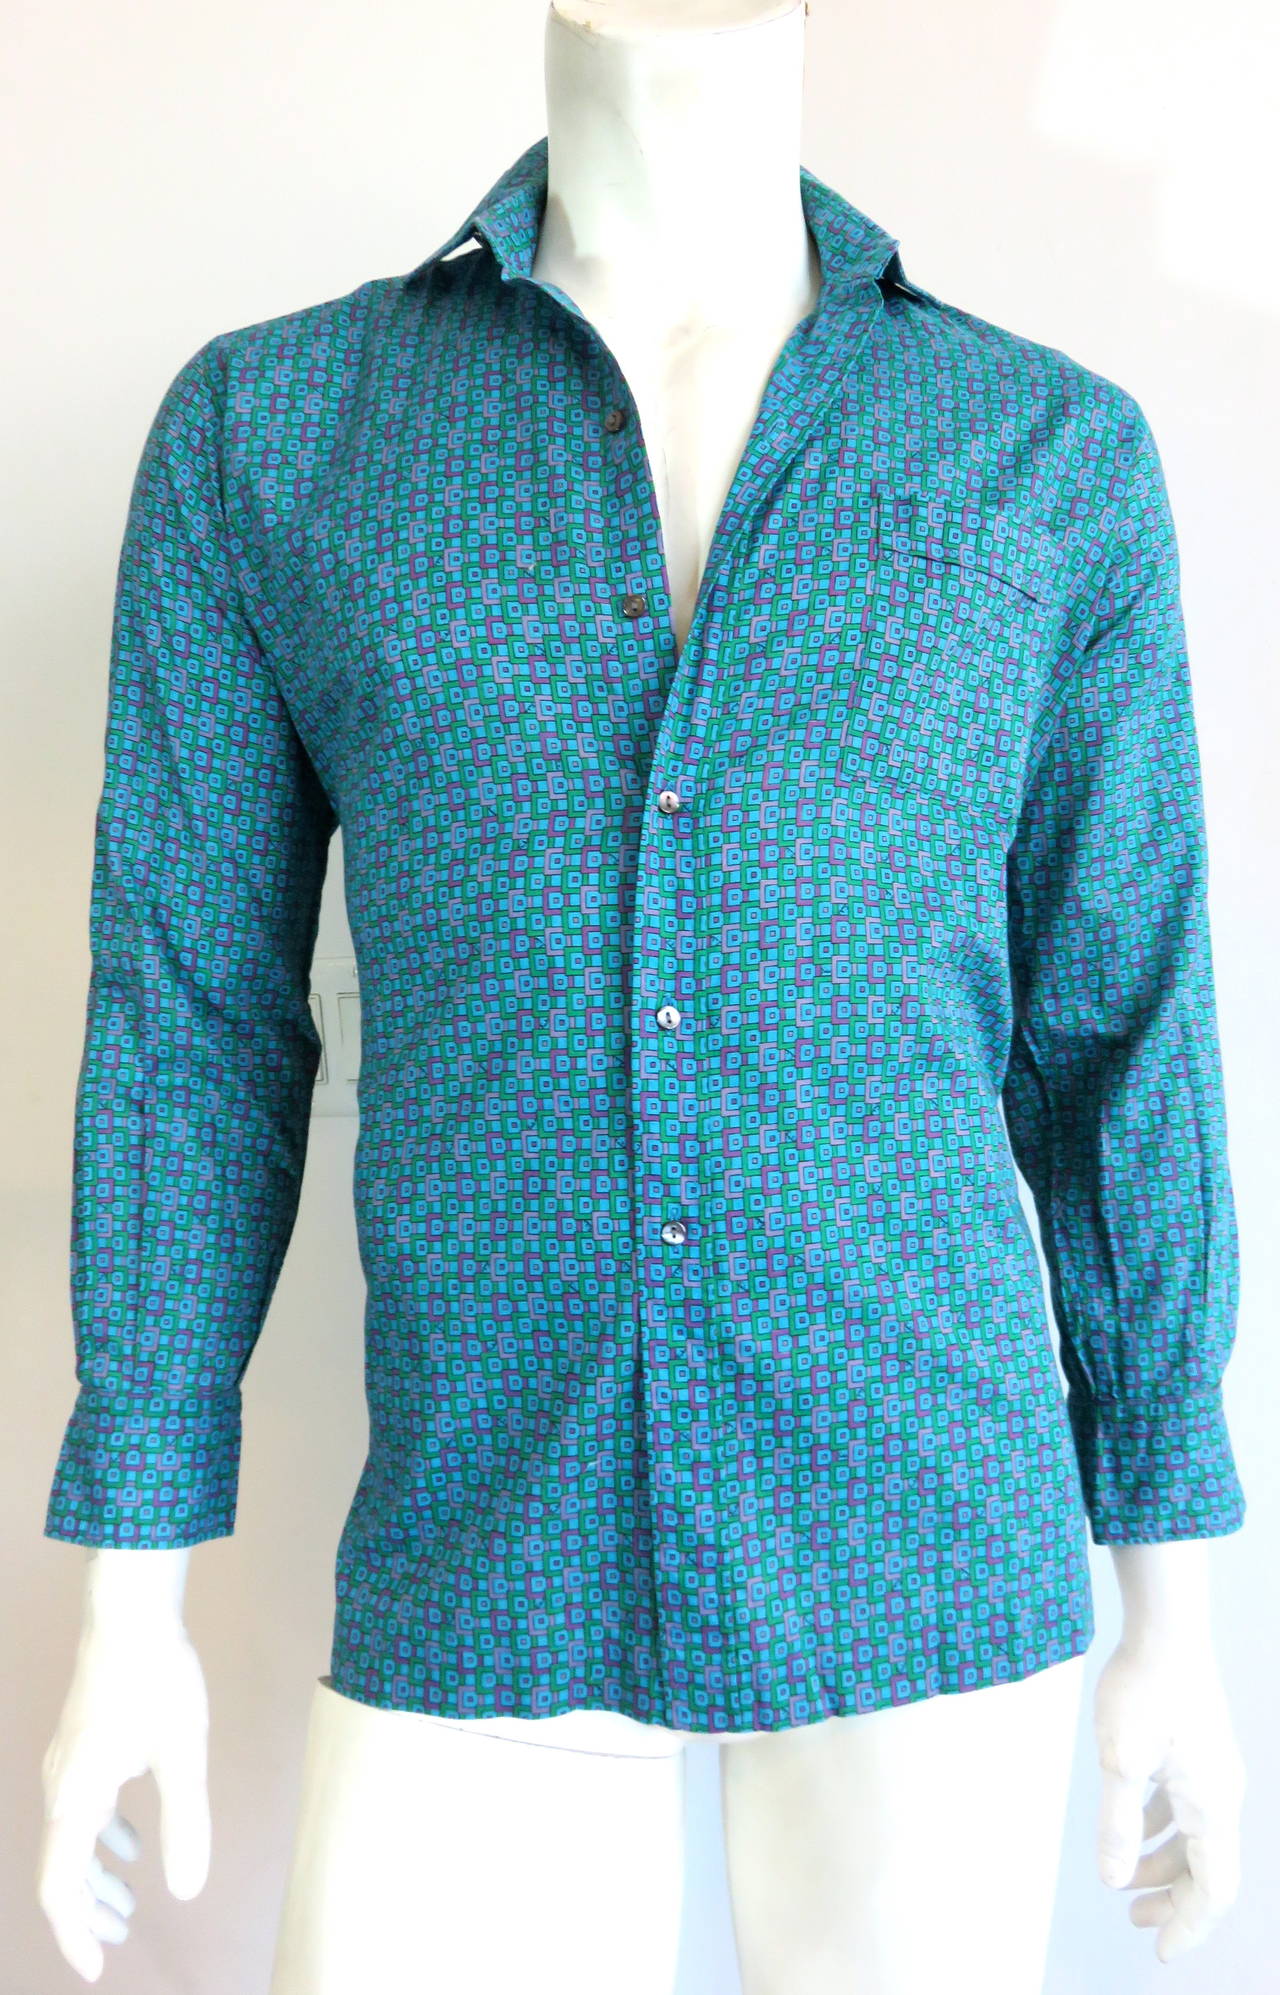 Women's 1970's EMILIO PUCCI Men's signed squares printed woven shirt